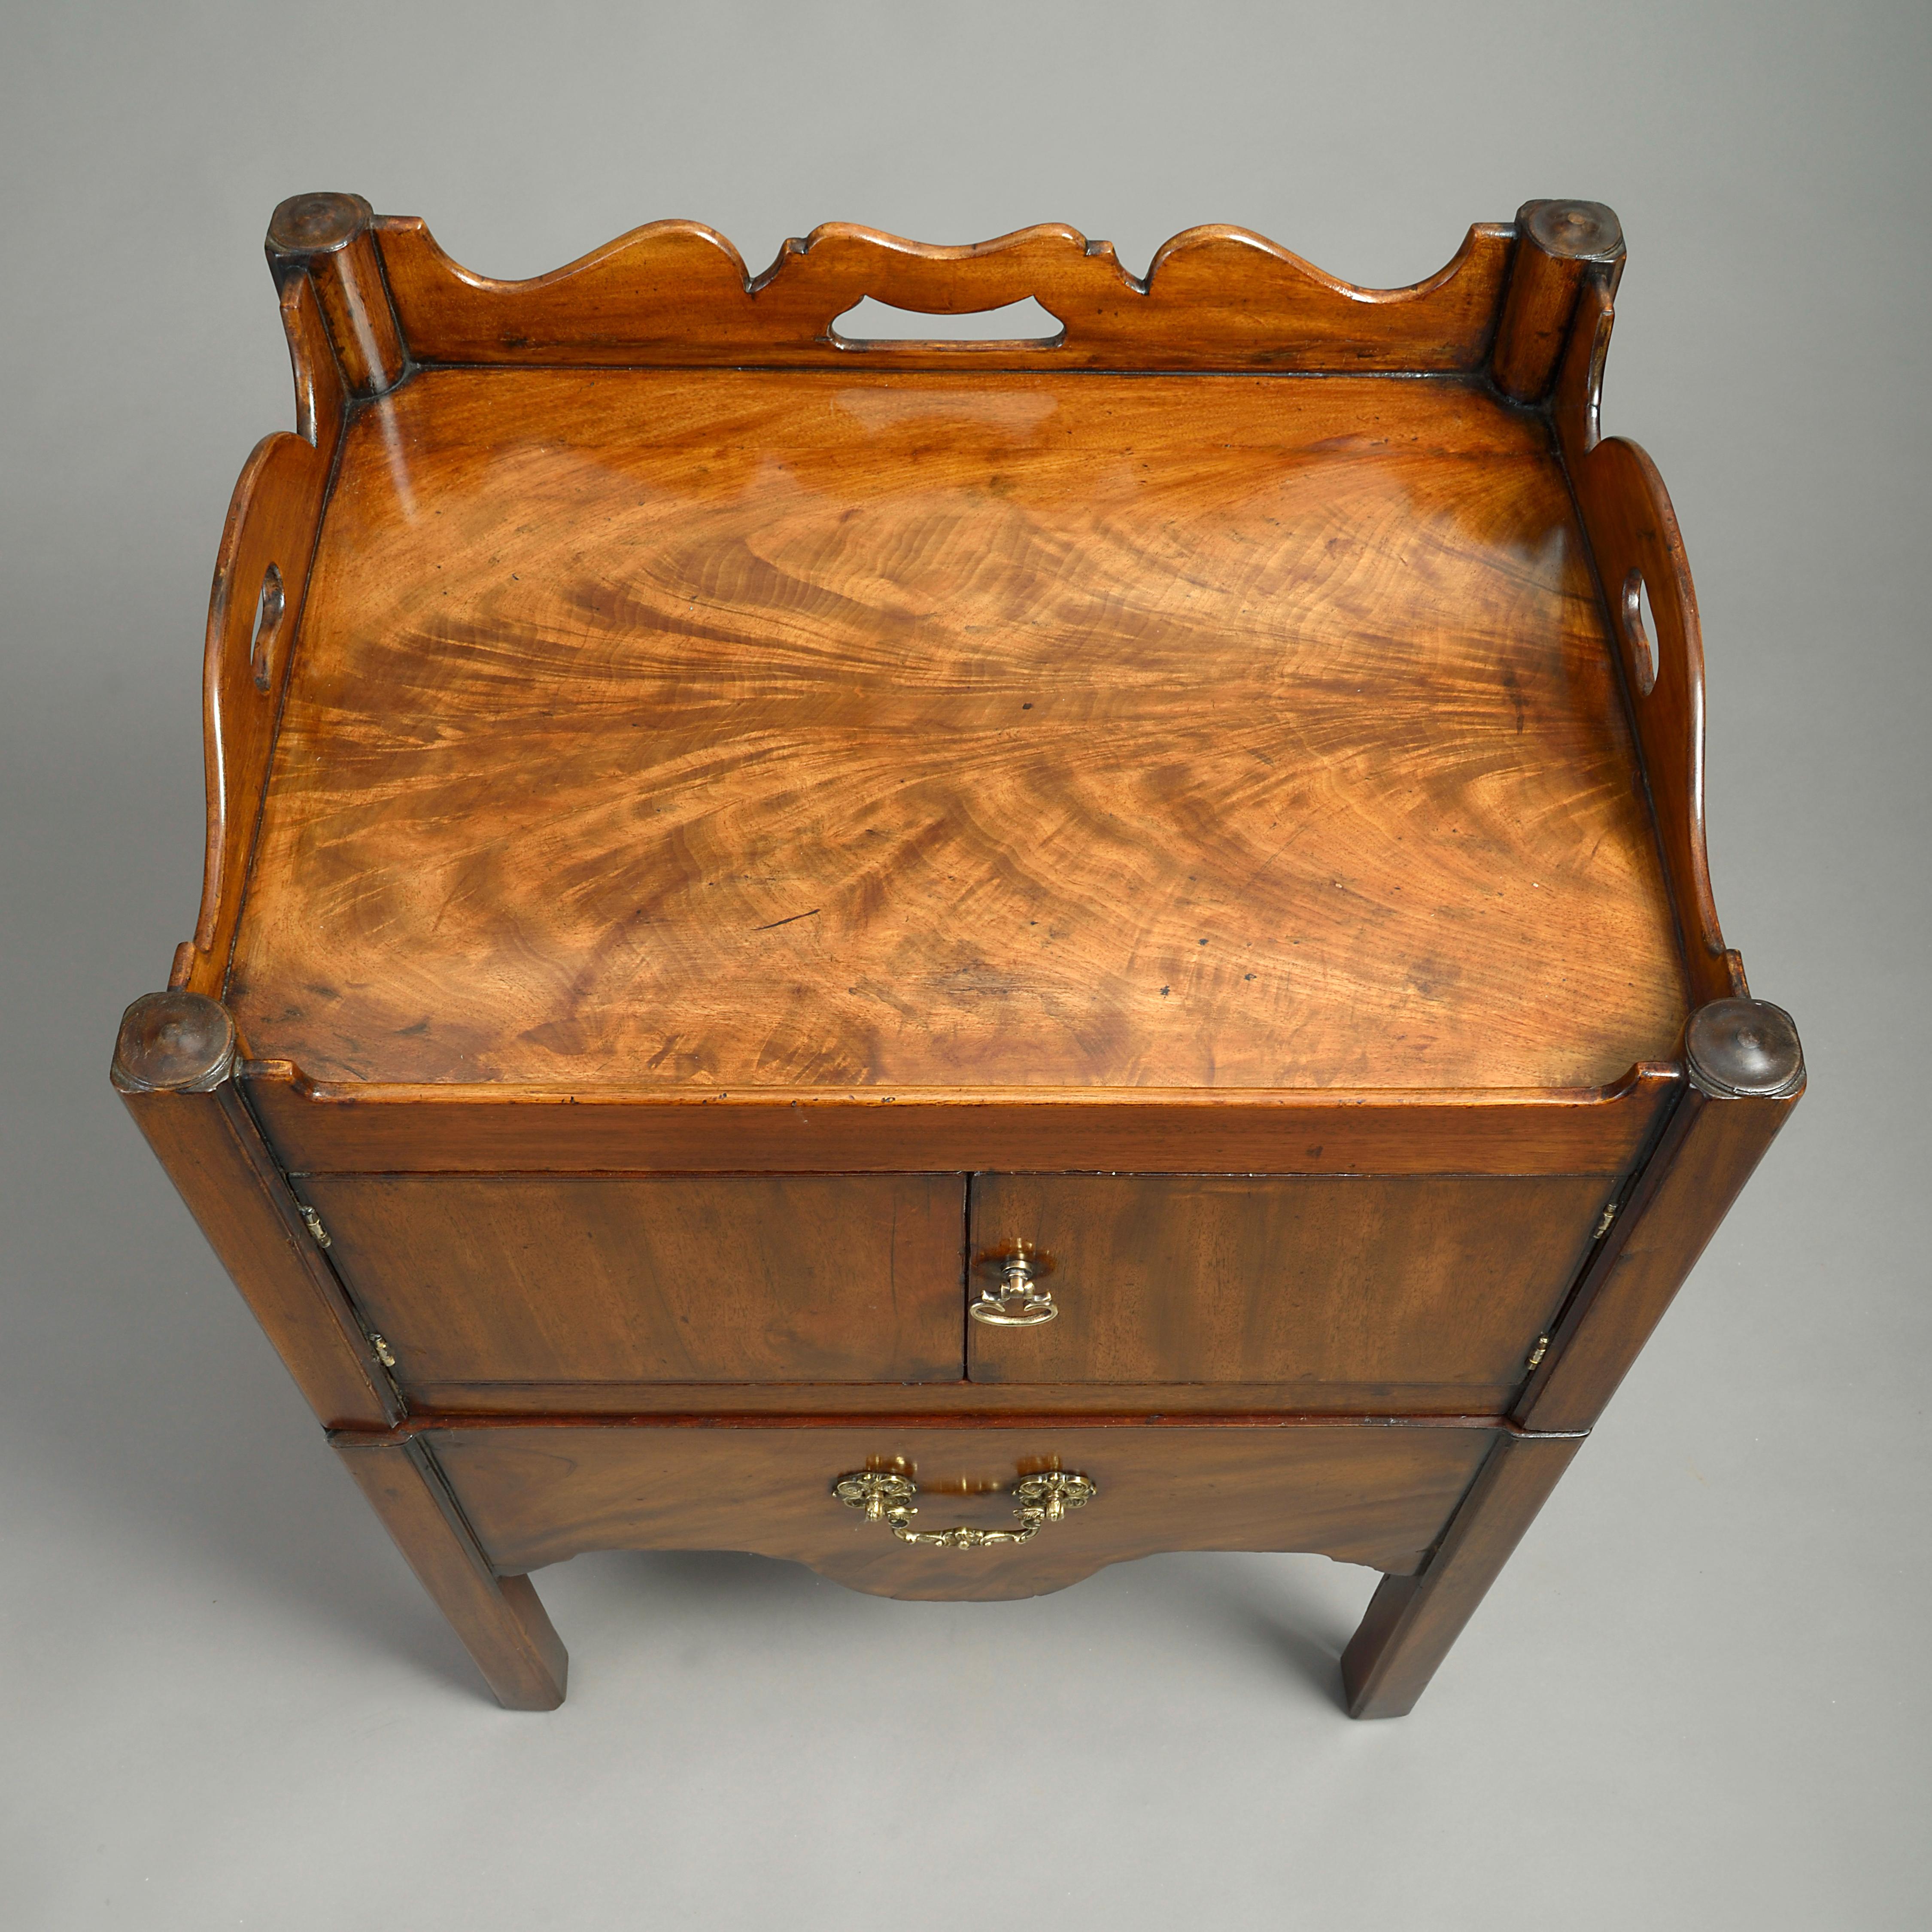 English Pair of 18th Century George III Period Bedside Commodes